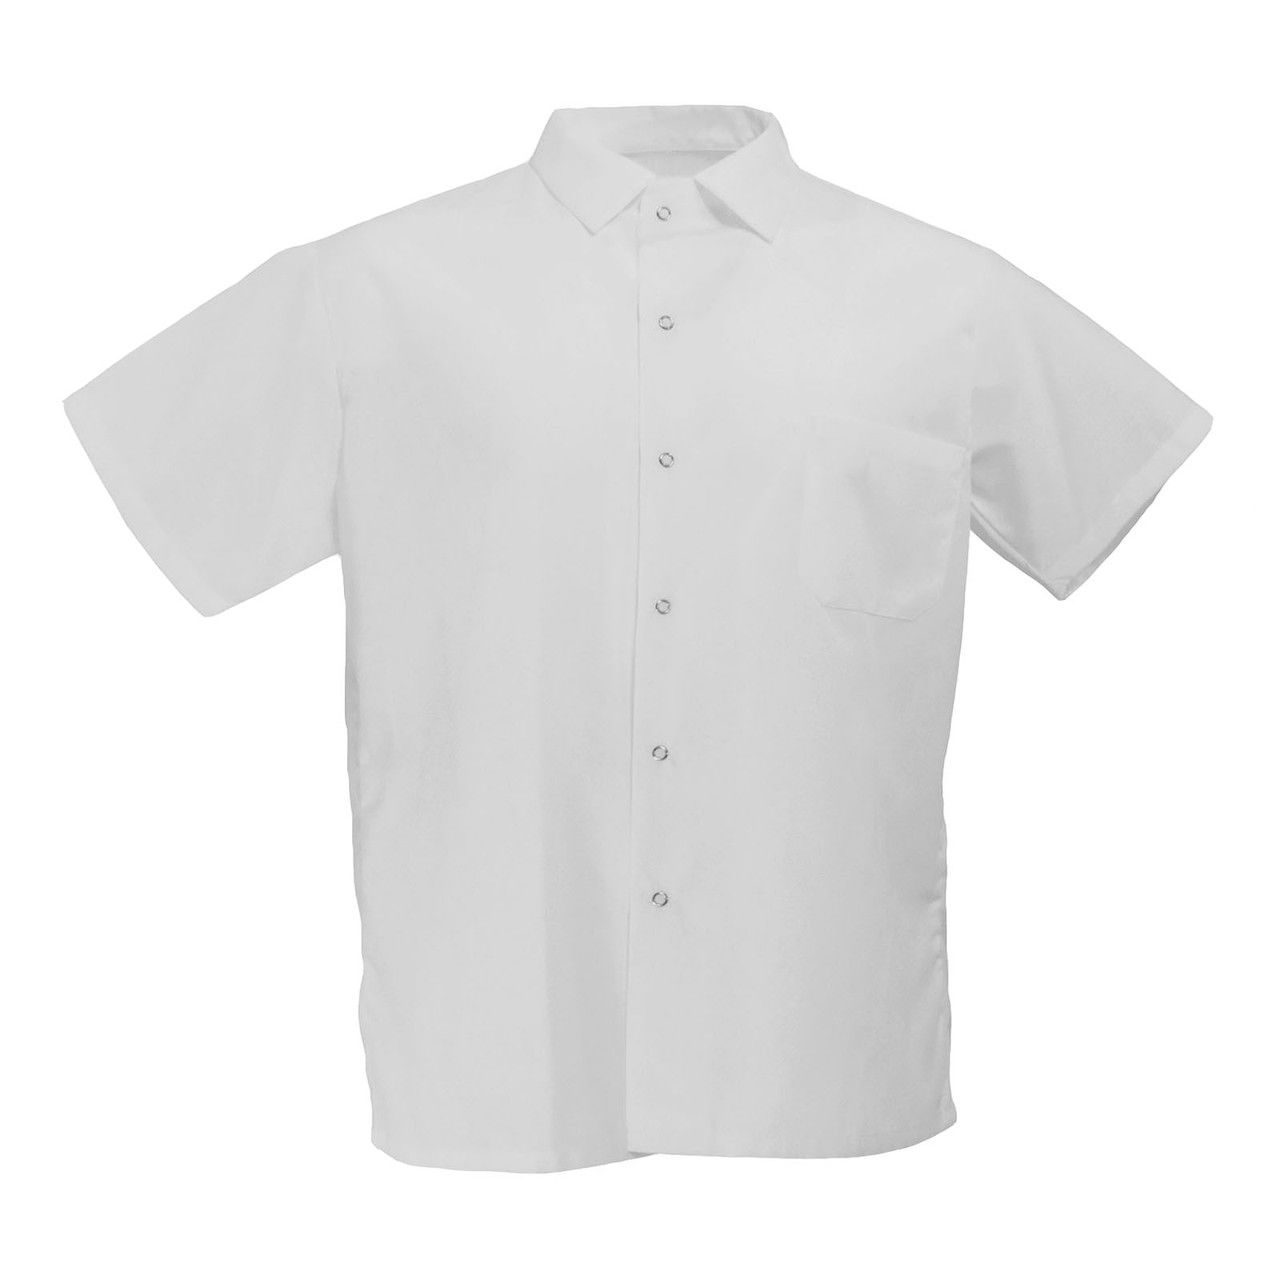 Can you list the features of Chef Trend S102 chef white shirts?